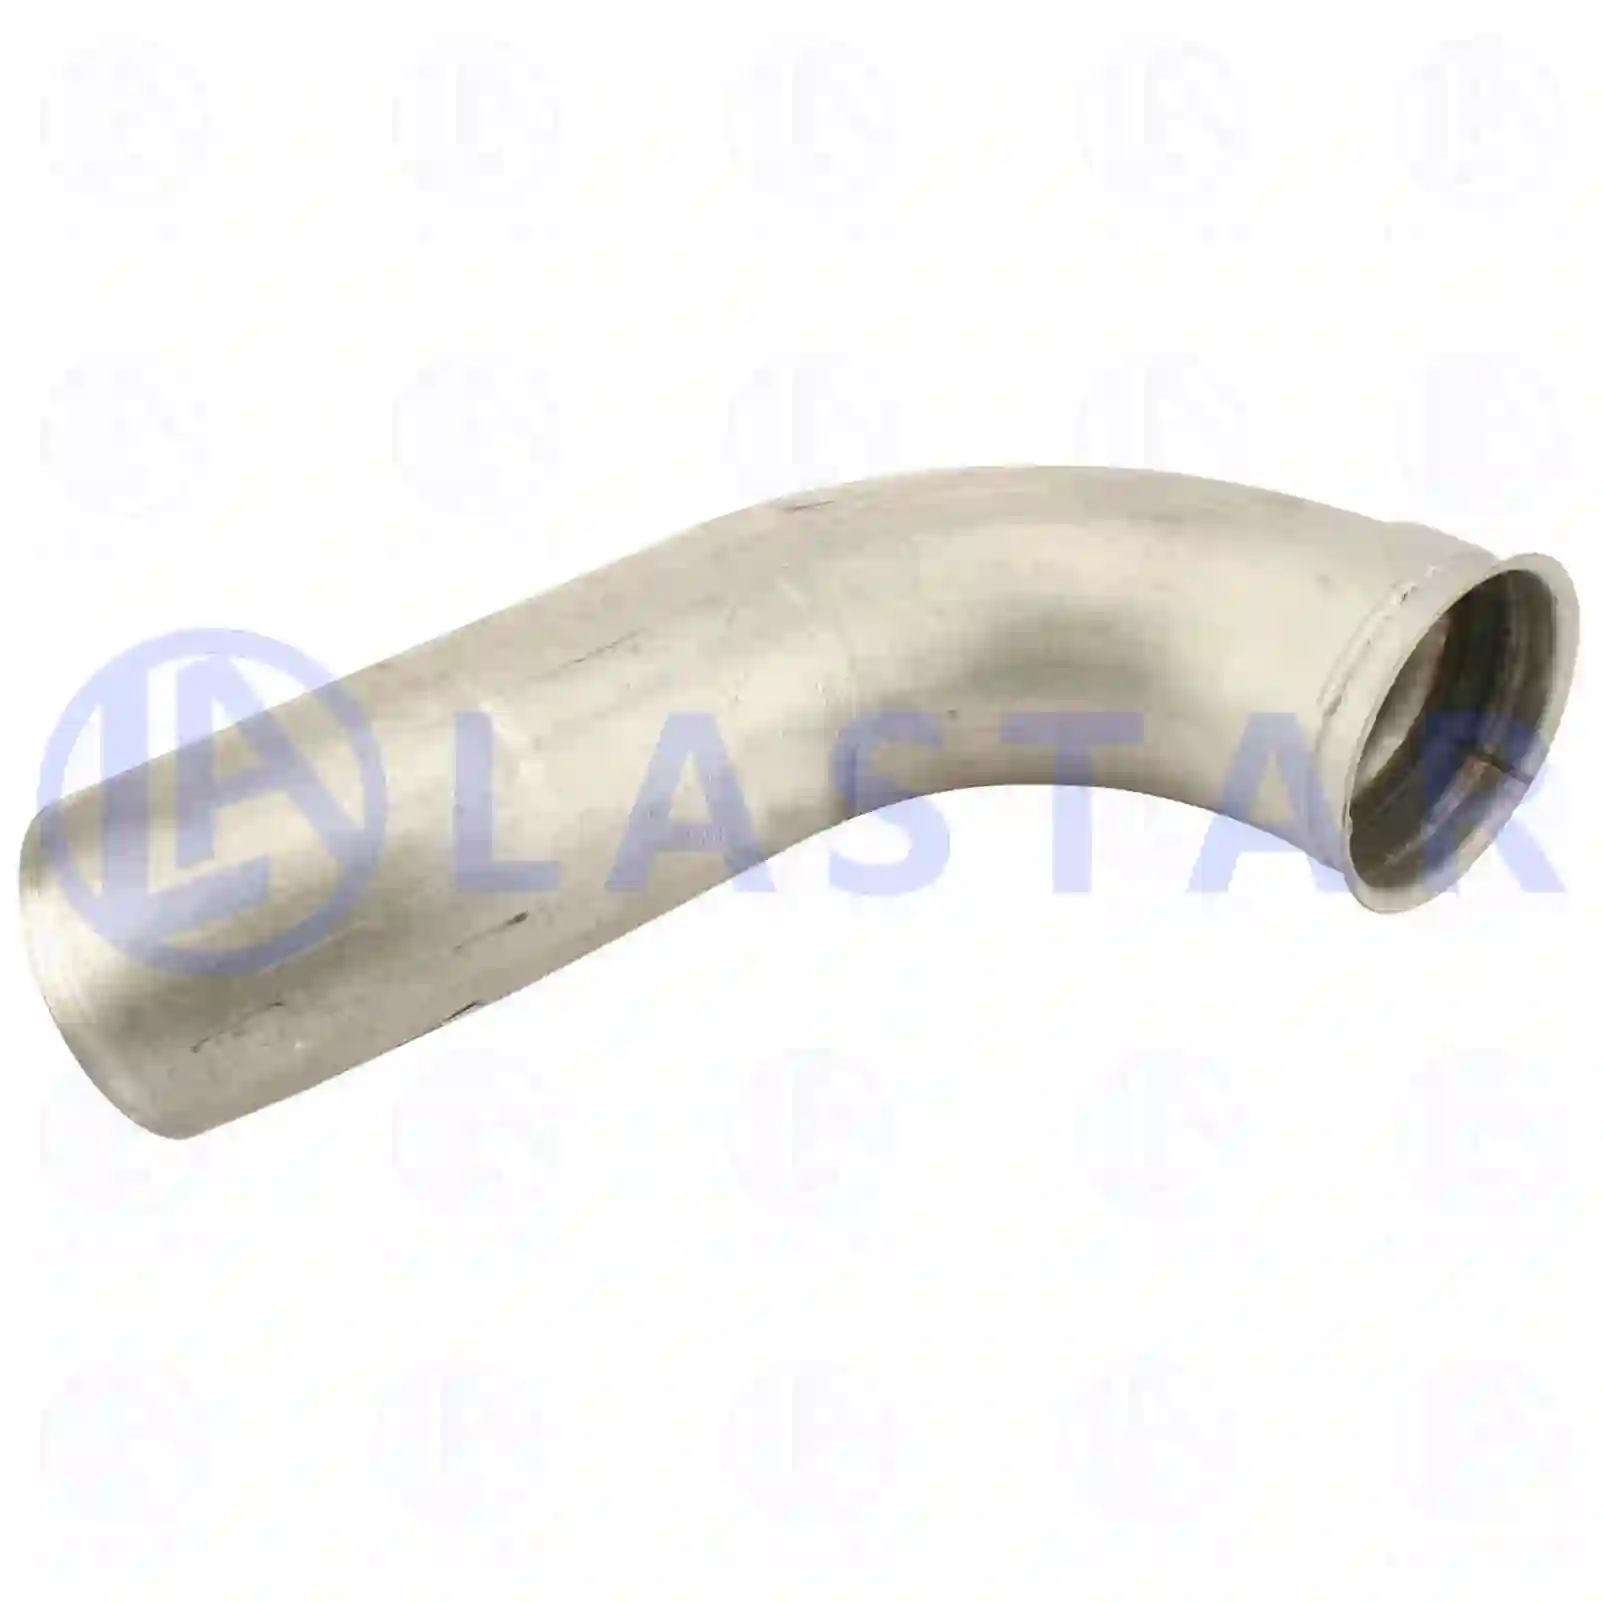 Exhaust pipe, 77706495, 1287304 ||  77706495 Lastar Spare Part | Truck Spare Parts, Auotomotive Spare Parts Exhaust pipe, 77706495, 1287304 ||  77706495 Lastar Spare Part | Truck Spare Parts, Auotomotive Spare Parts